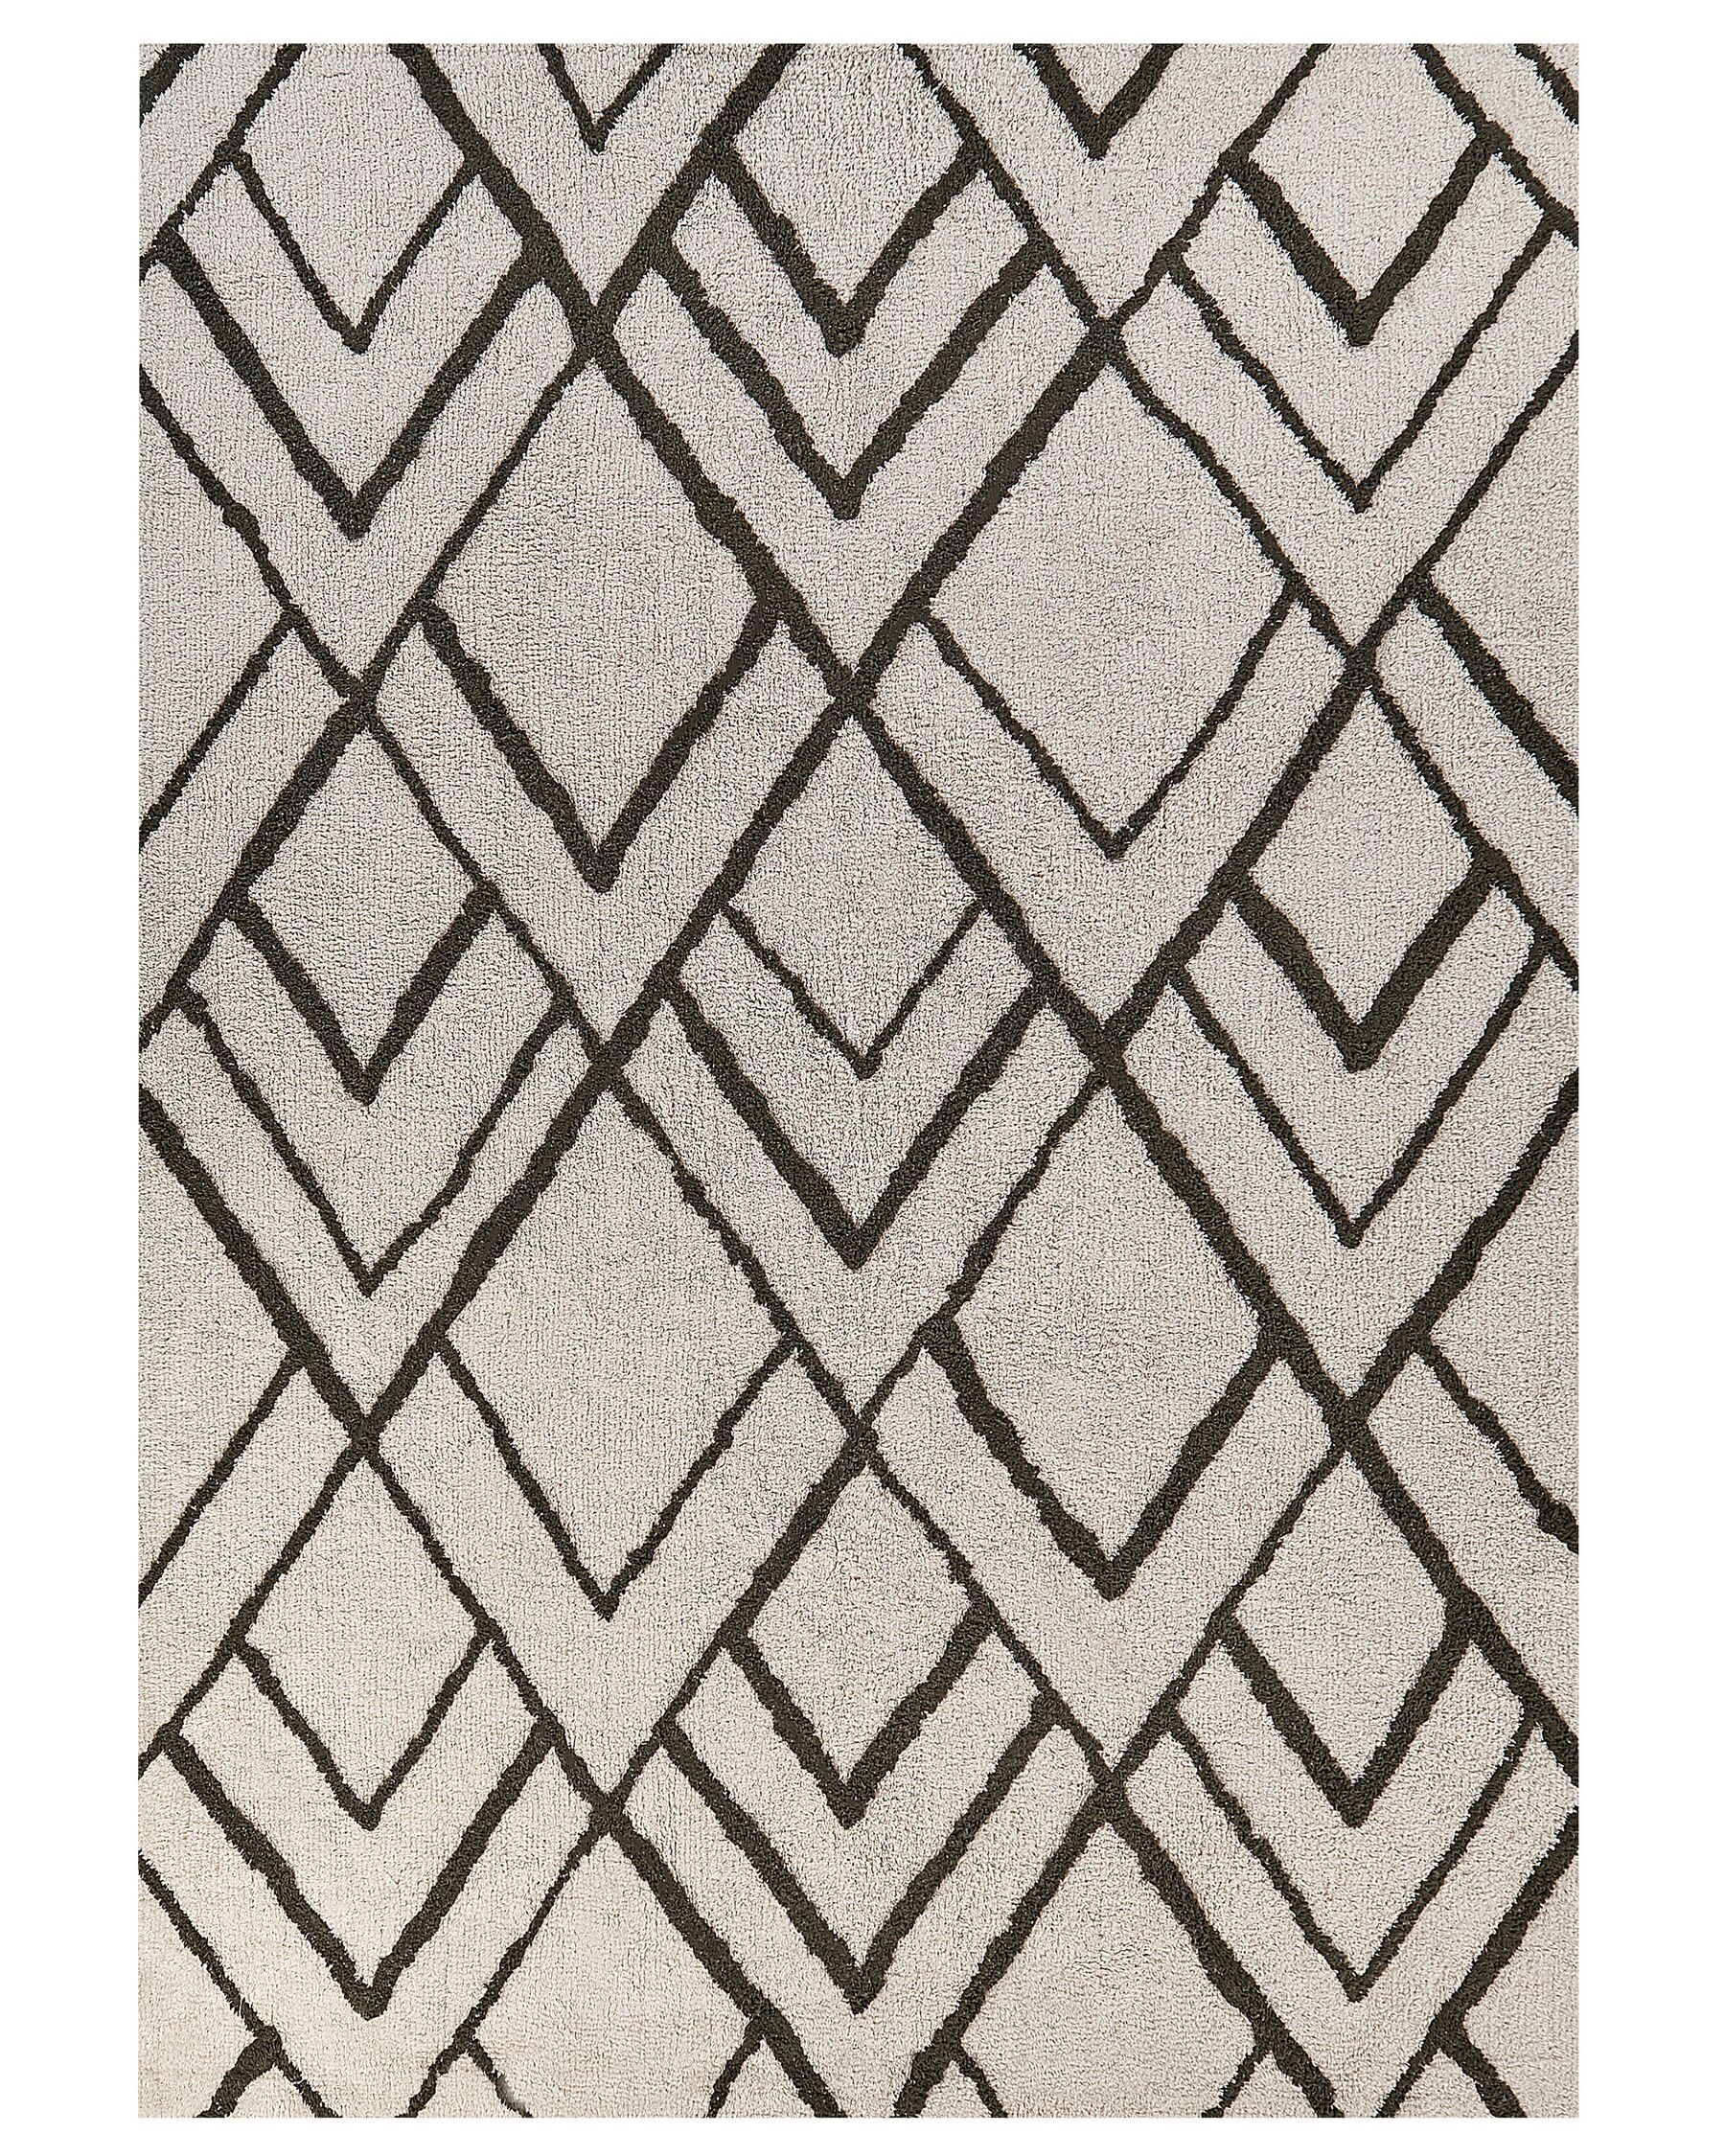 Shaggy Cotton Area Rug 160 x 230 cm Off-White and Green YESILKOY_842974